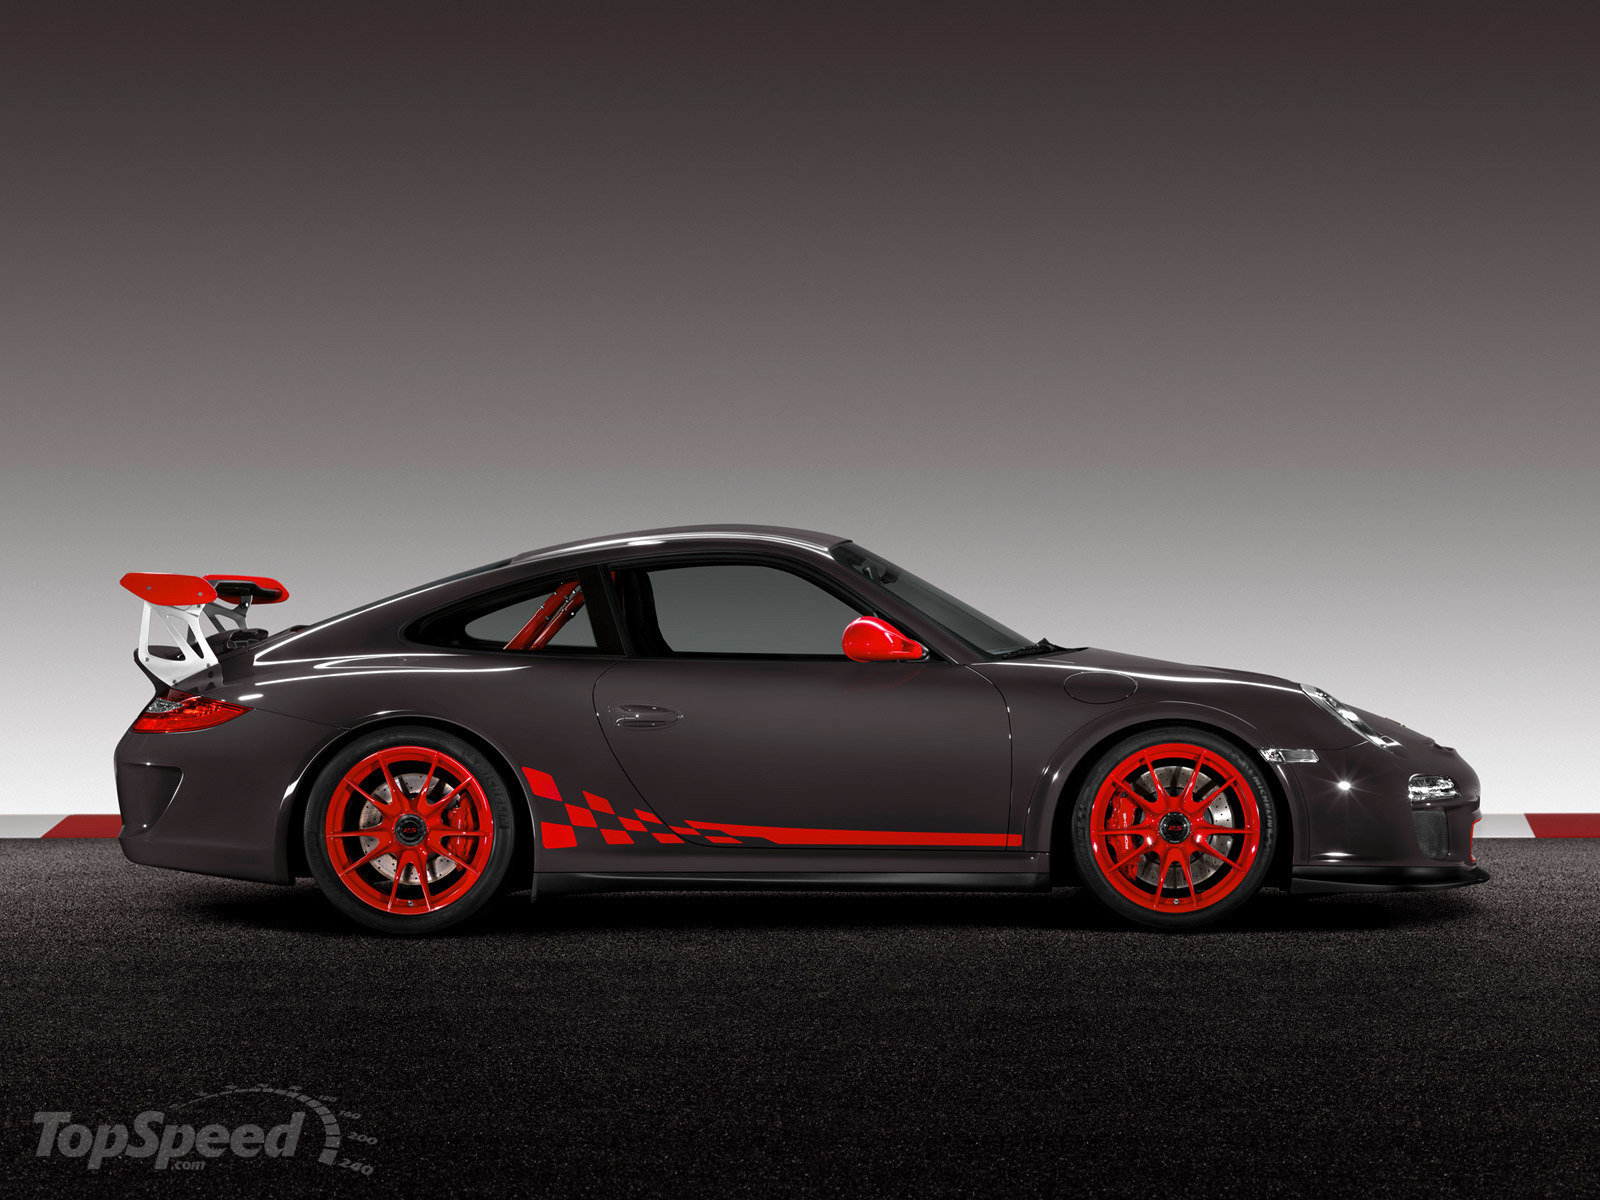 Free Cars HD Wallpapers: Porsche GT3-RS Tuning HD Wallpapers